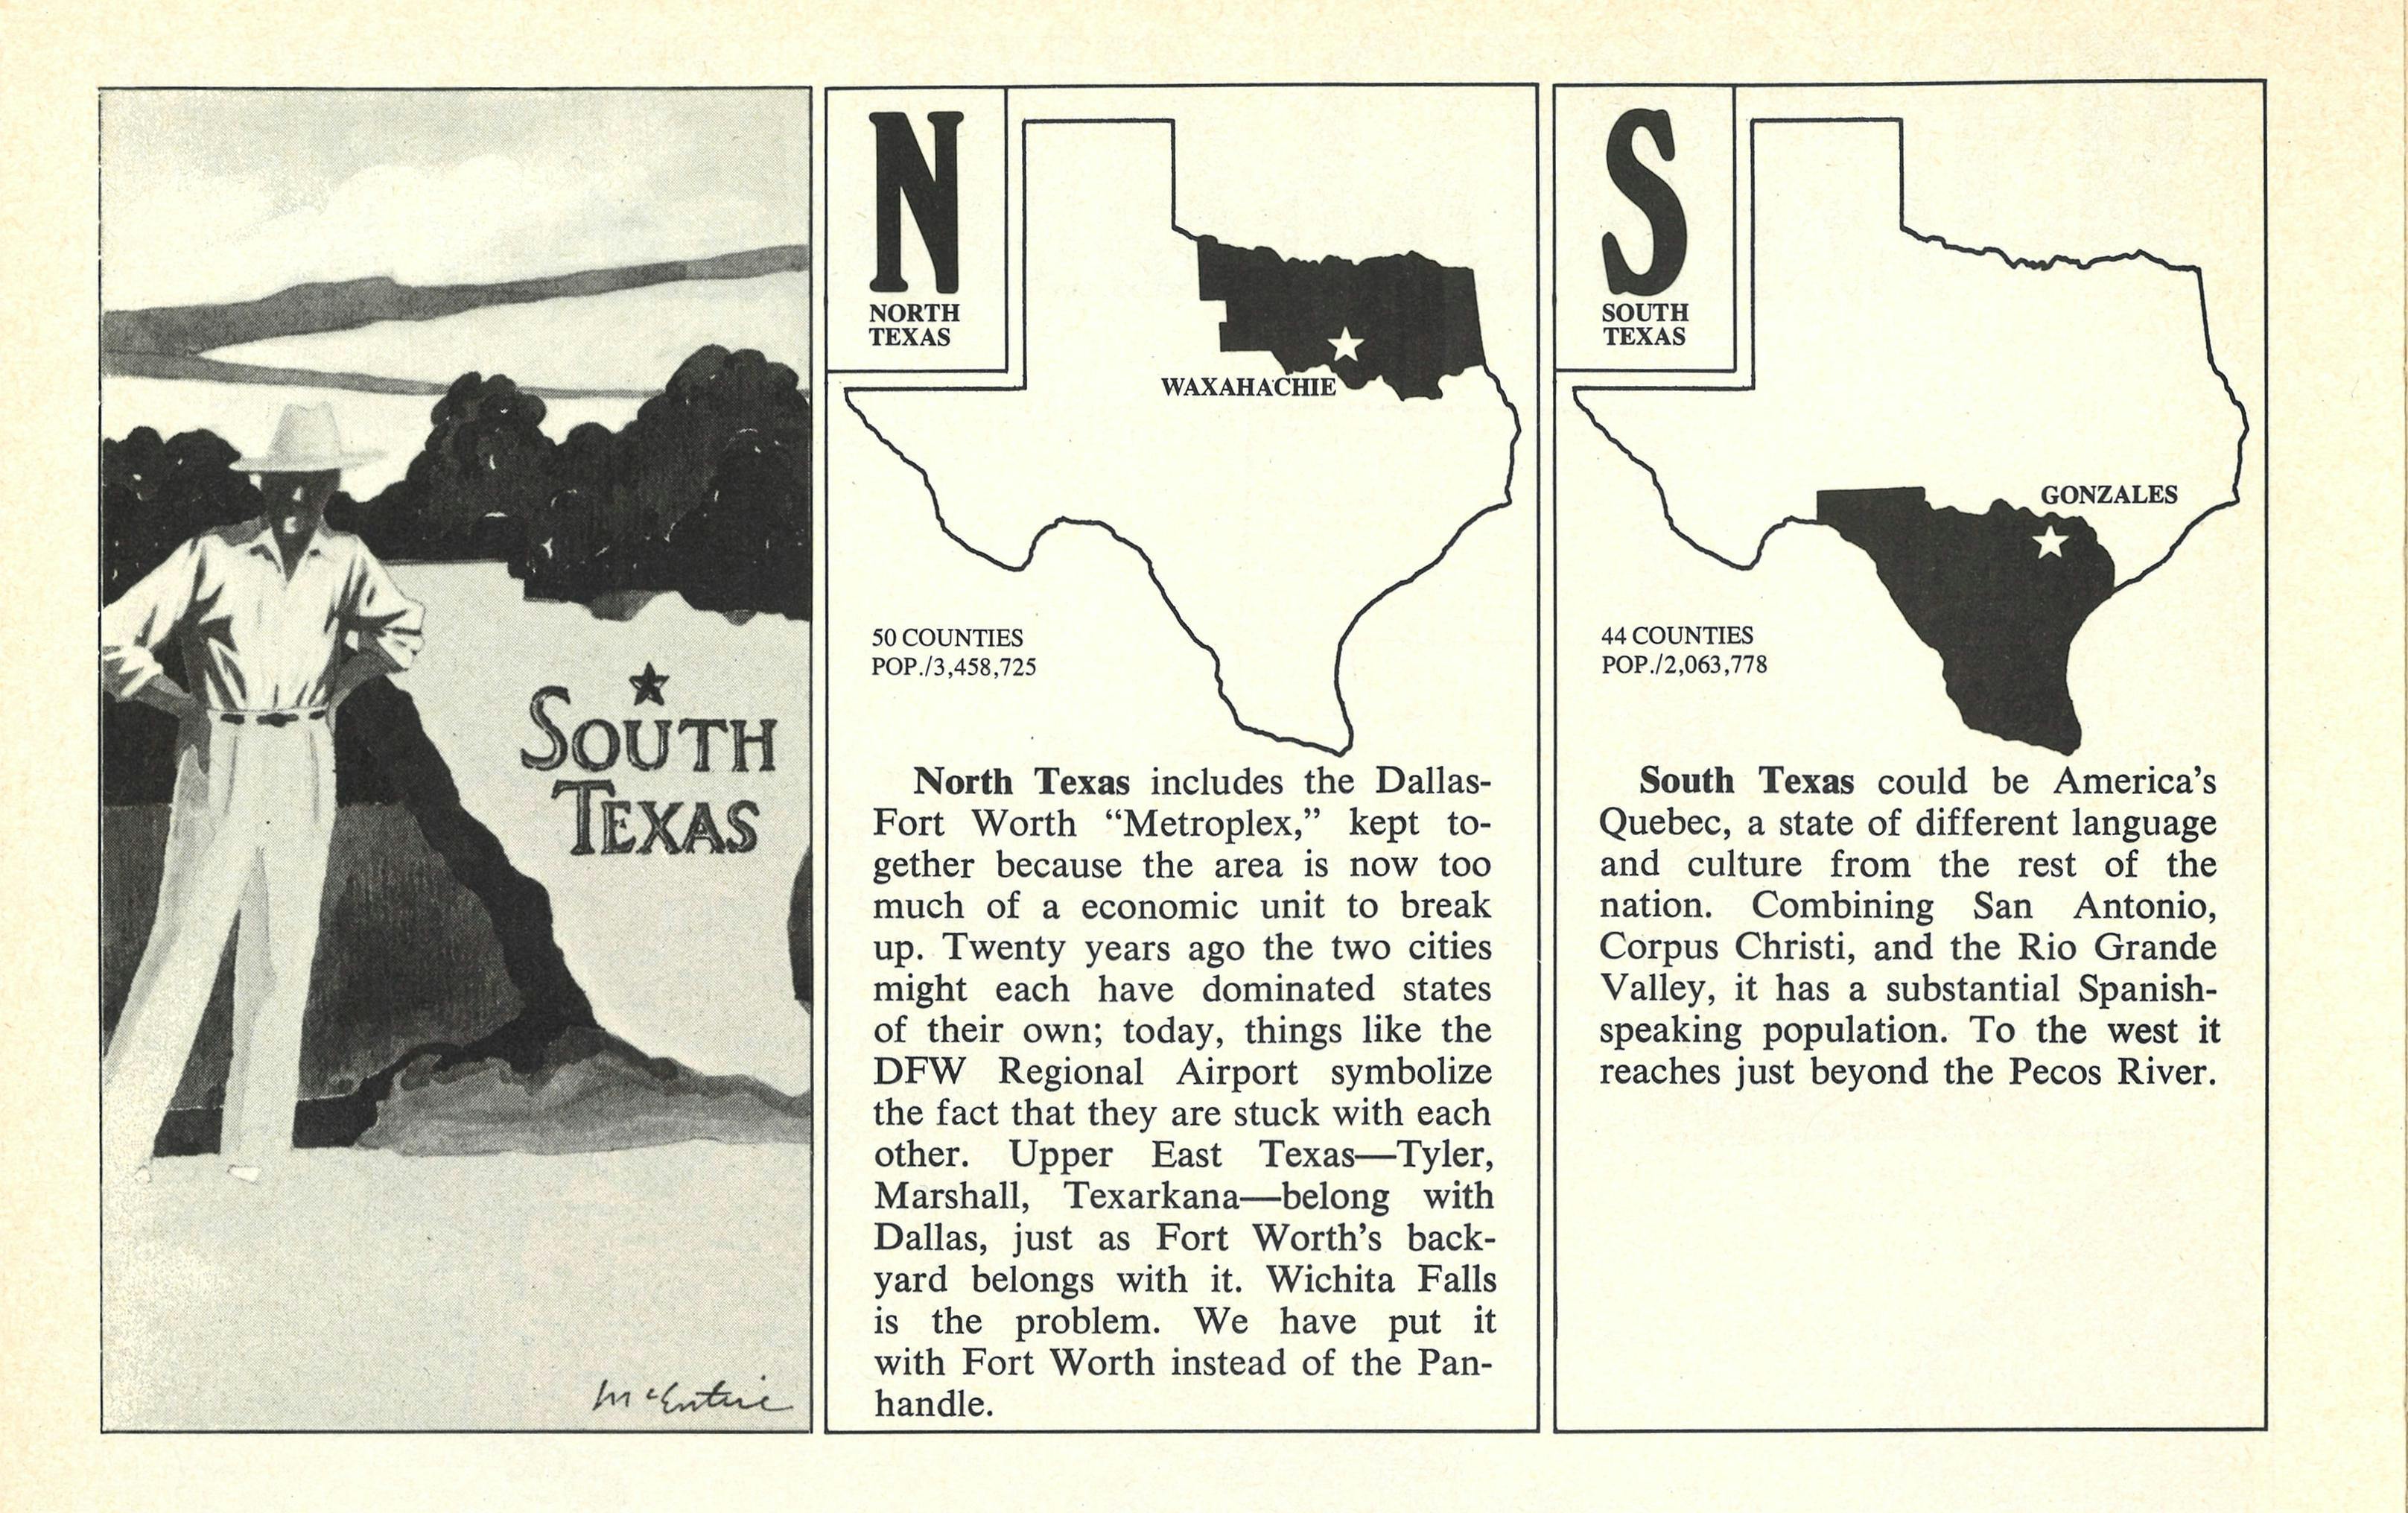 Descriptions of both North Texas and South Texas. 